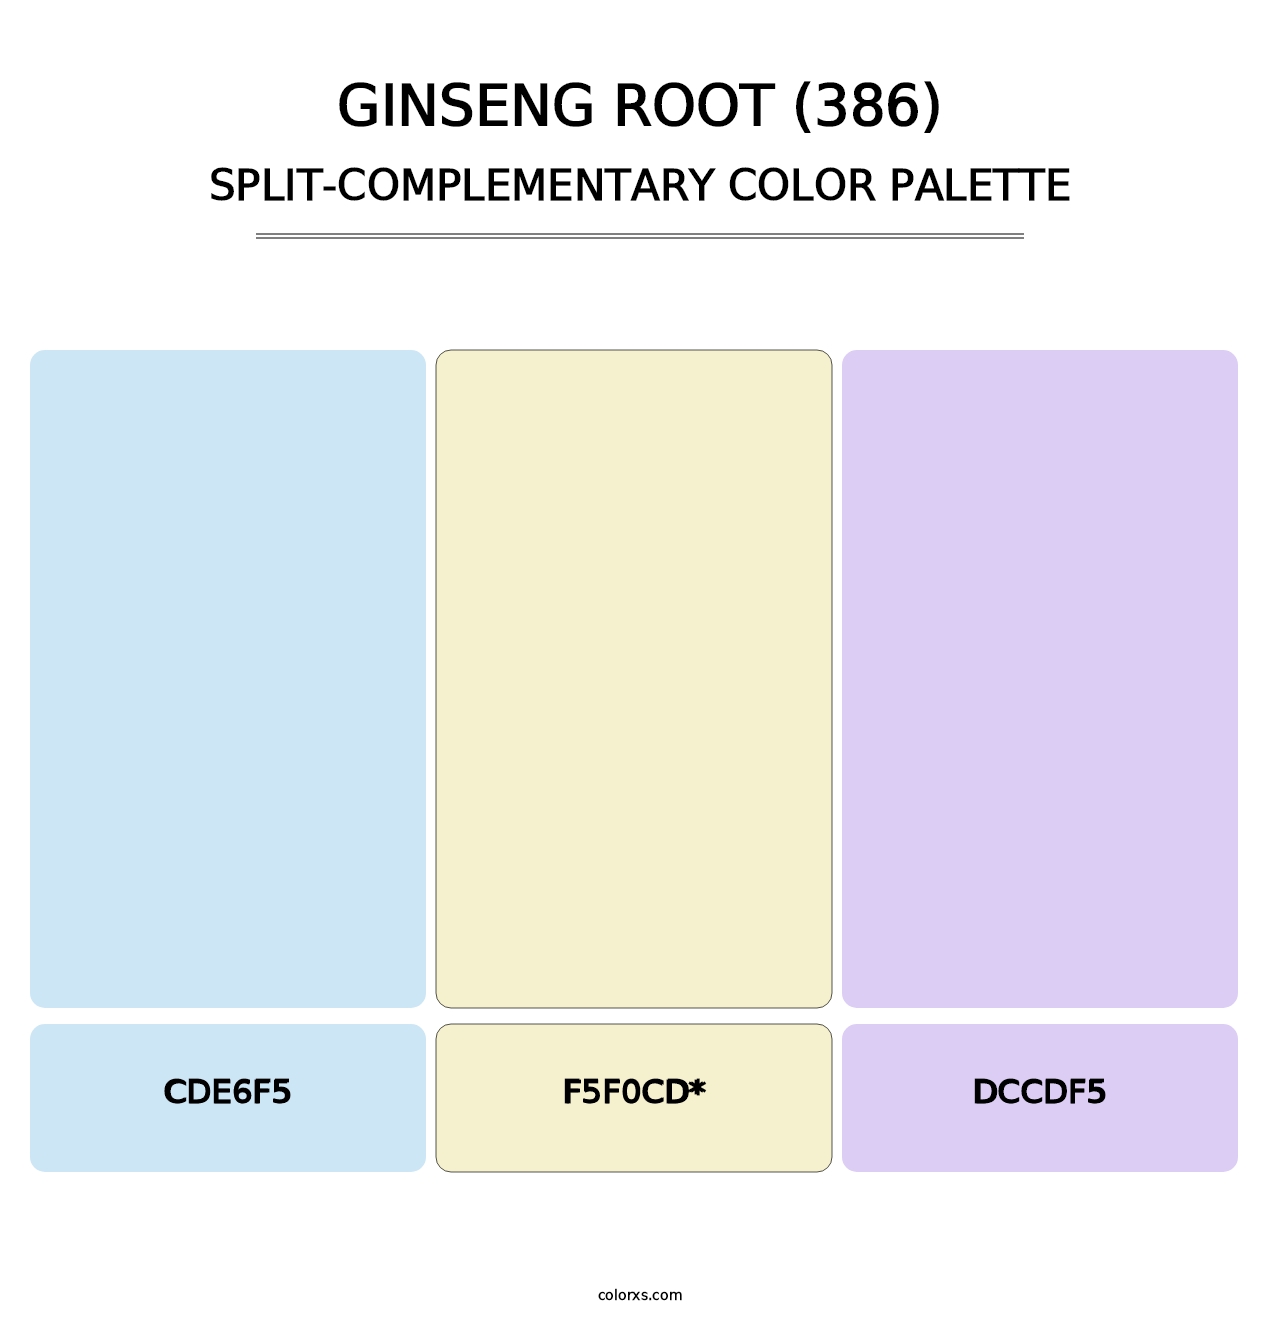 Ginseng Root (386) - Split-Complementary Color Palette